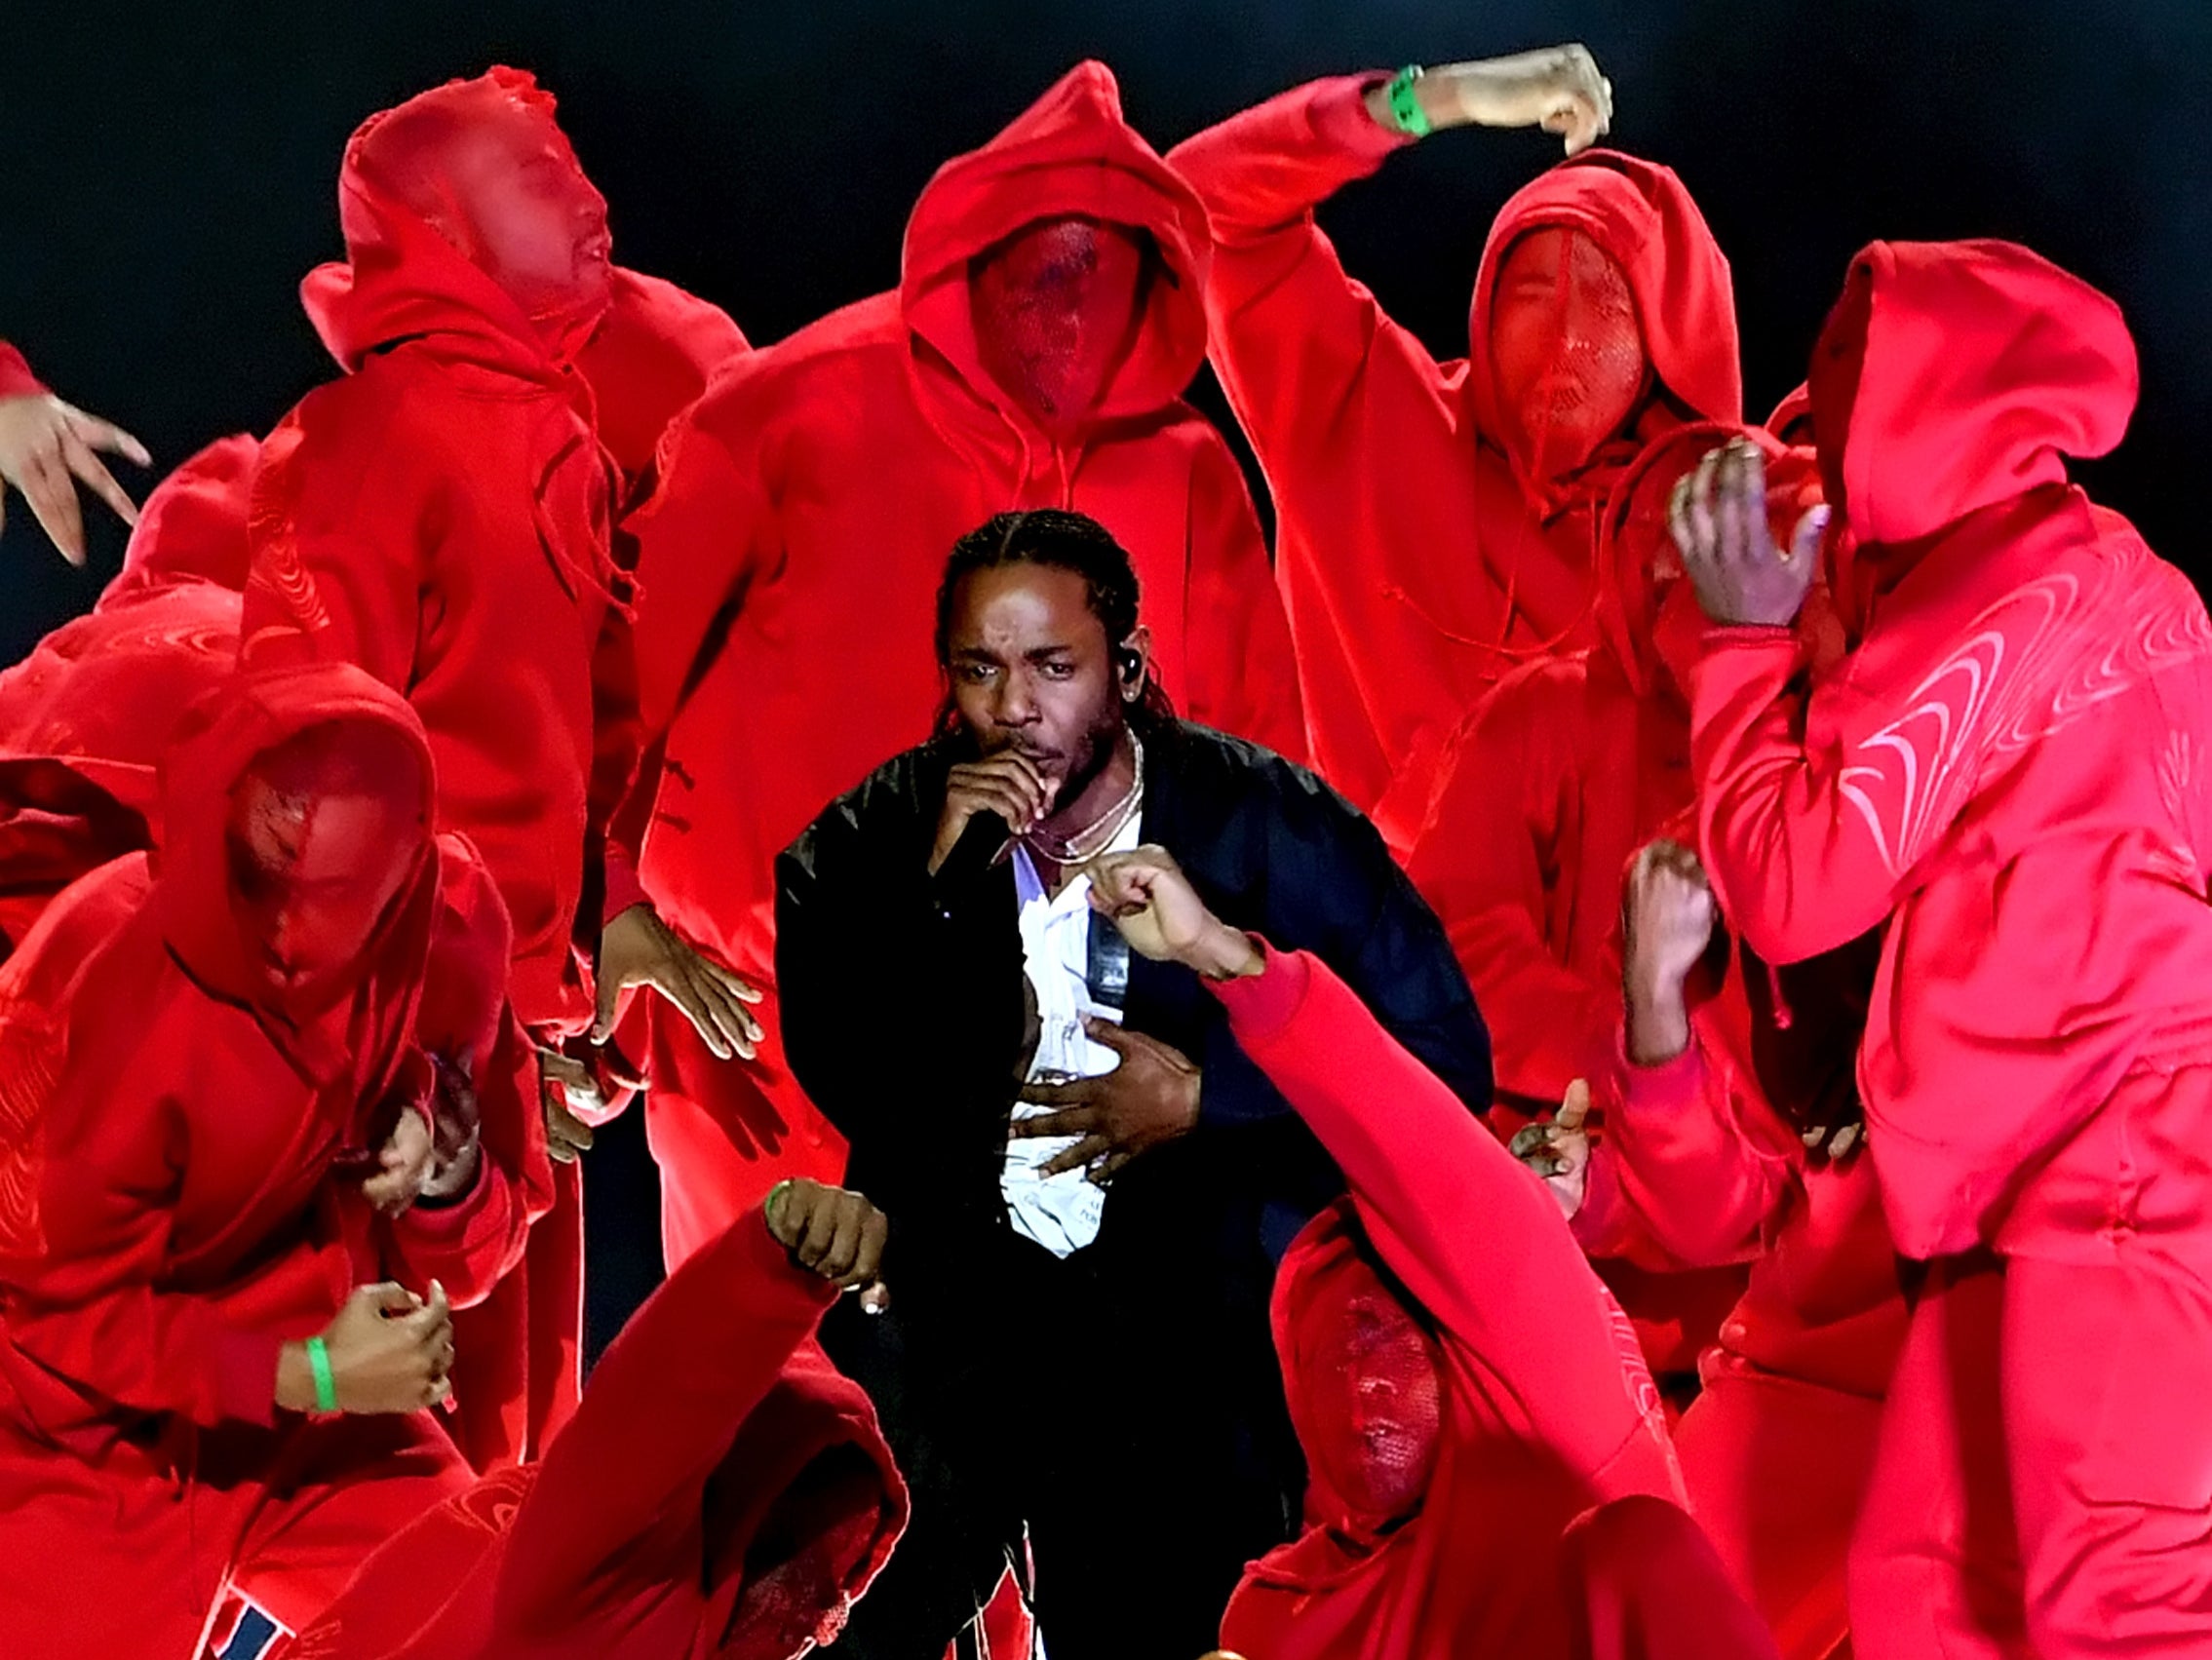 Kendrick Lamar is headlining the Super Bowl halftime show along with Dr Dre, Eminem, Snoop Dogg and Mary J Blige